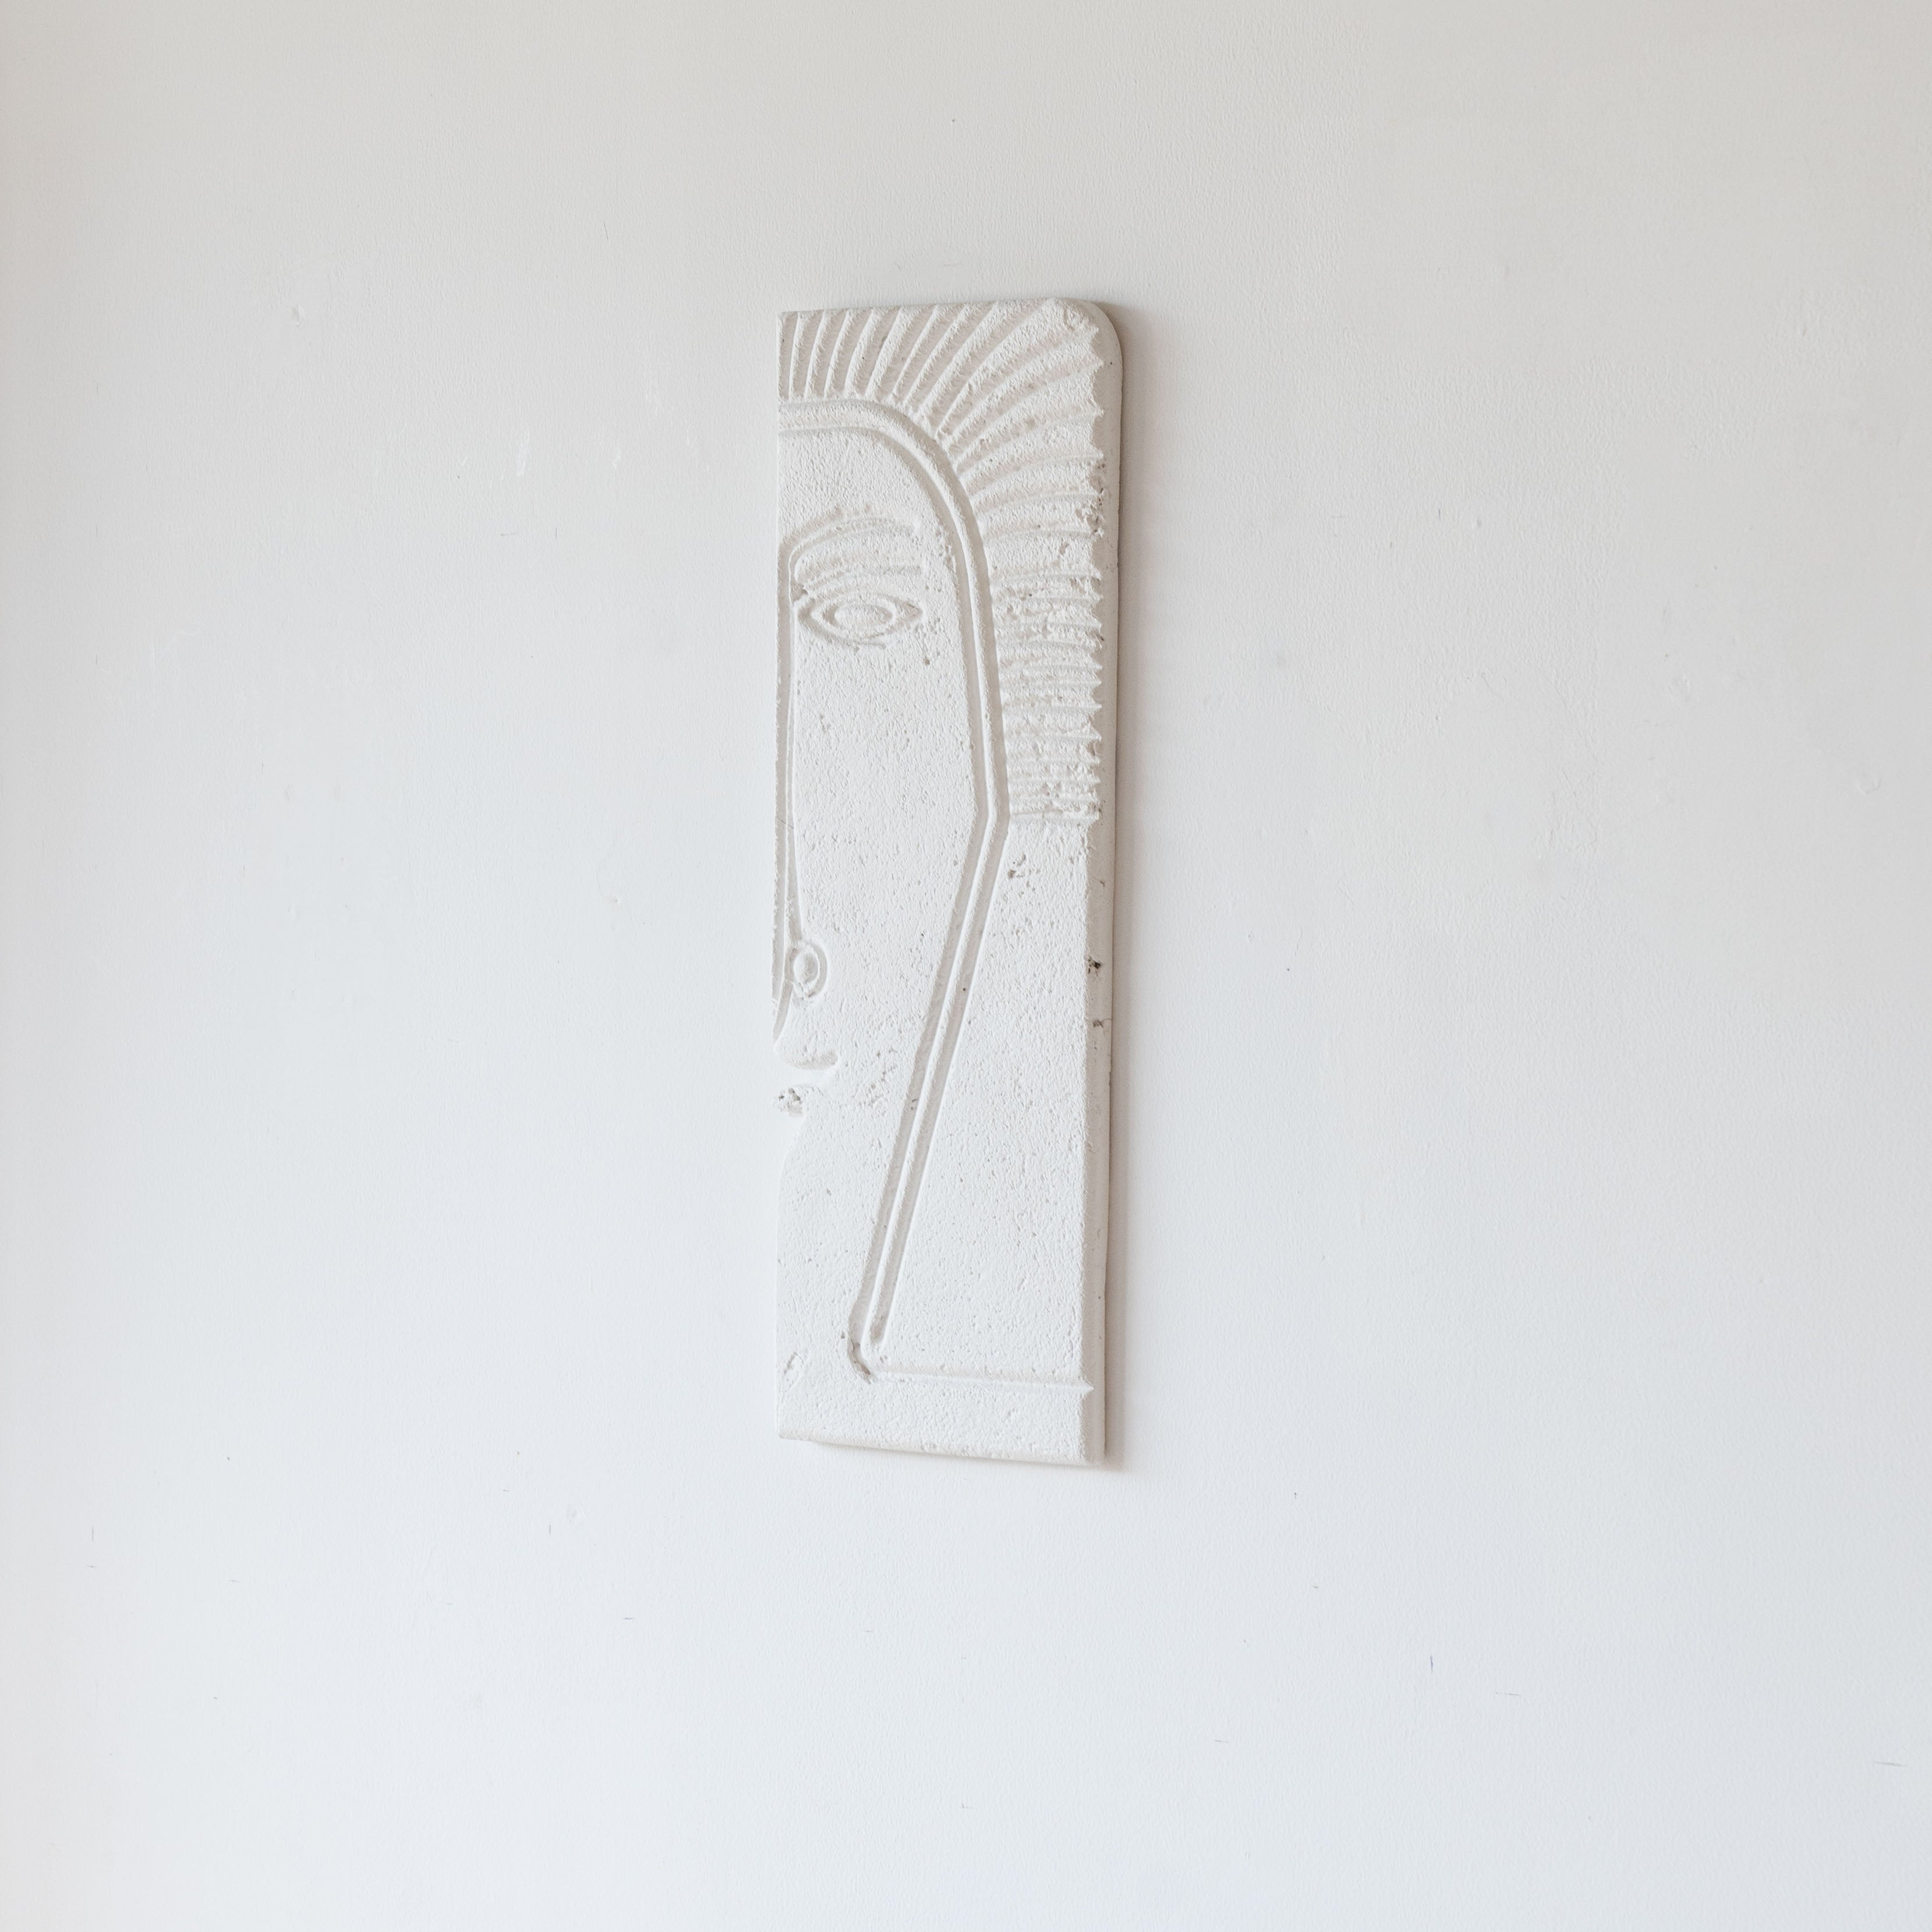 Tribe Wall Hanging Artwork - Wood and Steel Furnitures